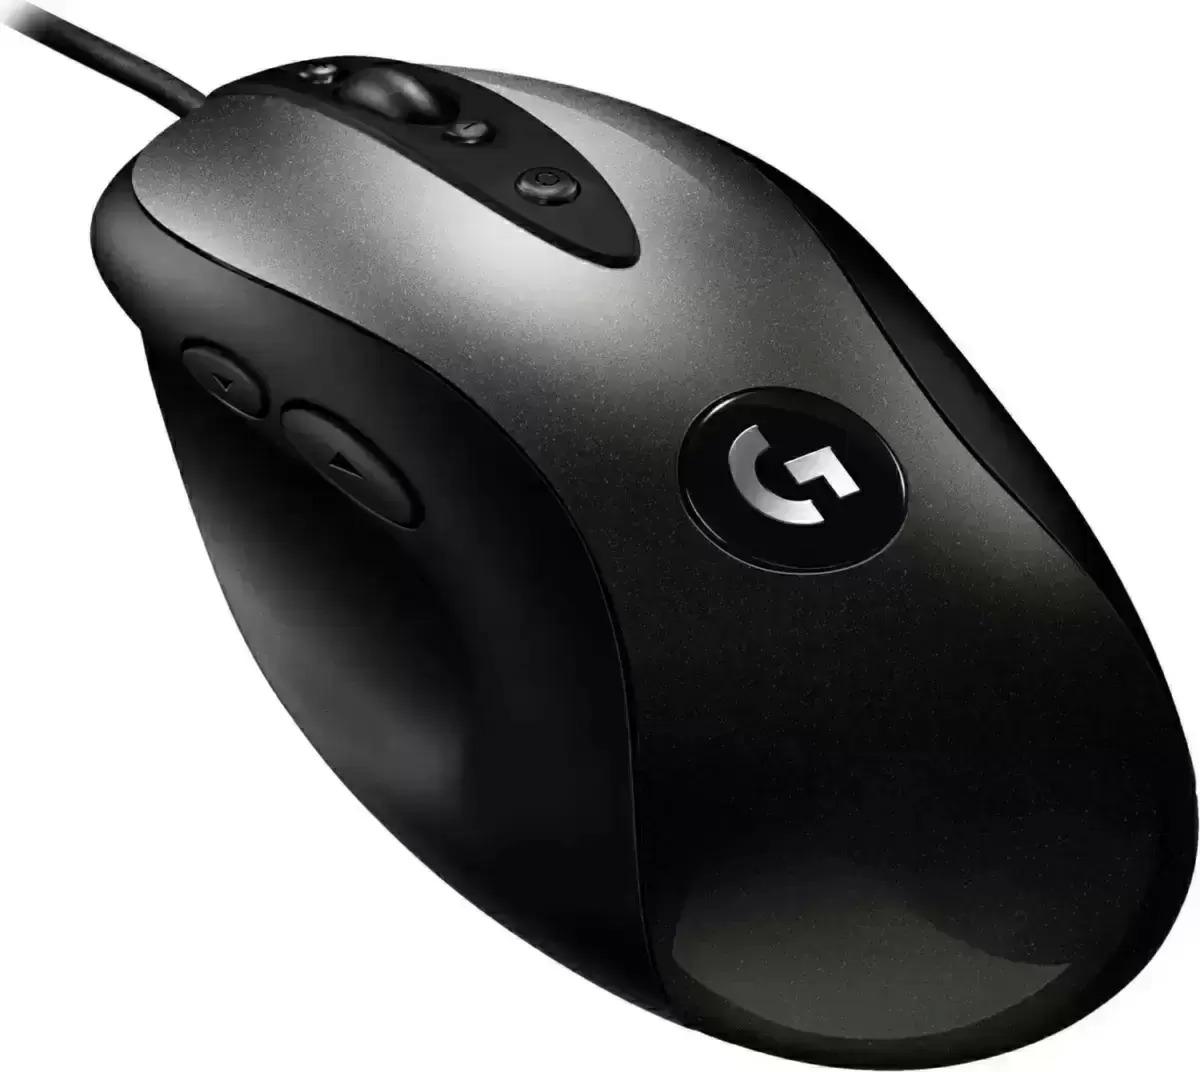 Logitech G MX518 Wired Optical Gaming Mouse for $19.99 Shipped